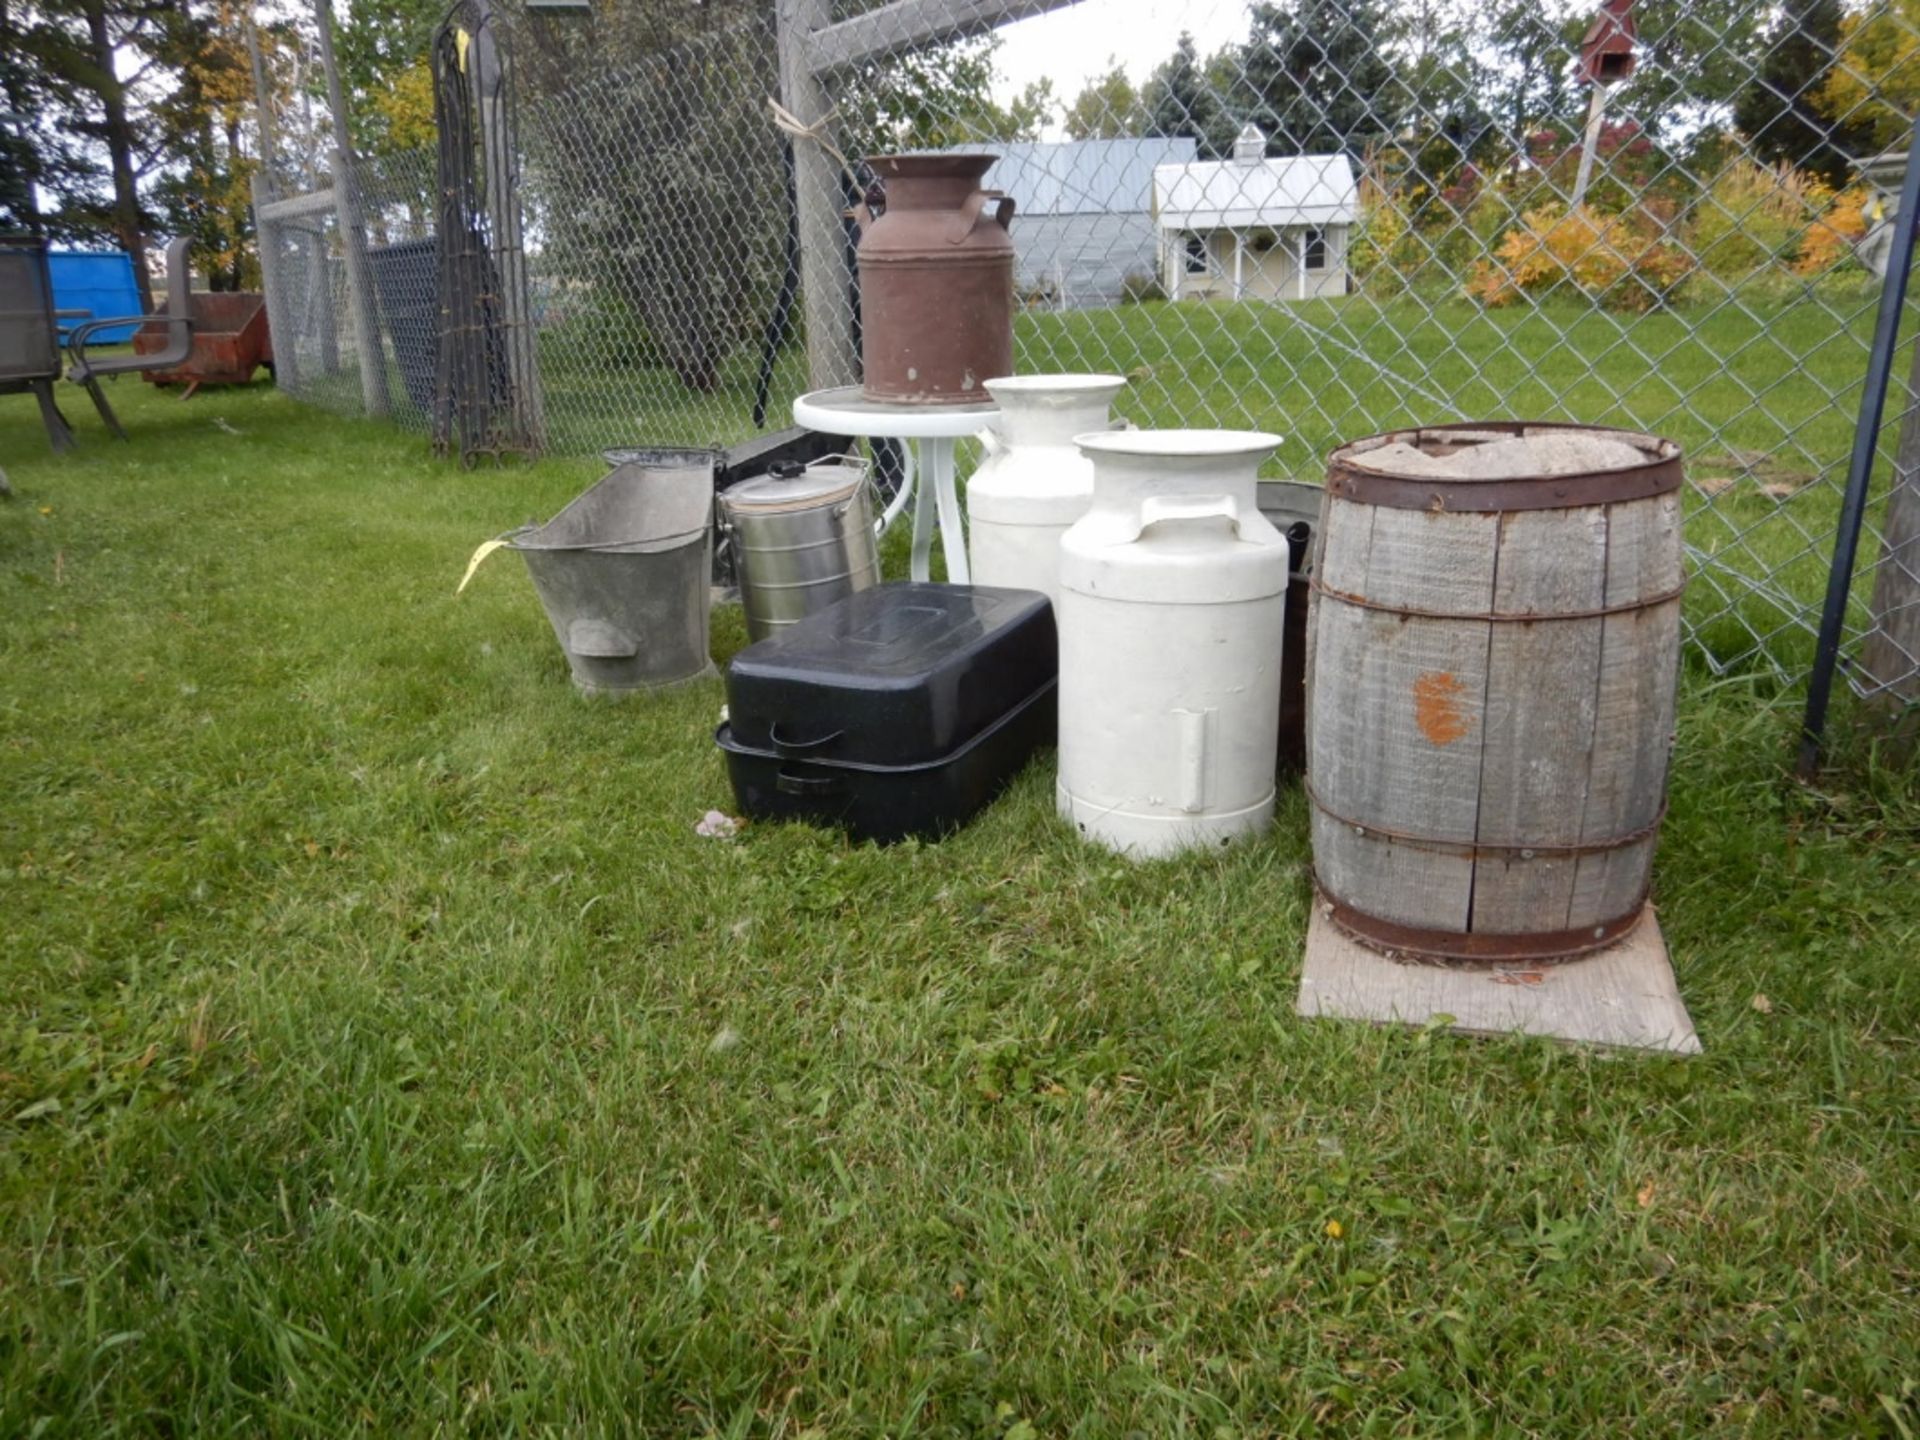 L/O ASSORTED COAL PAILS, CREAM CANS, COPPER WASH BOILER, LARGE ROASTER PAN, ETC - Image 3 of 4